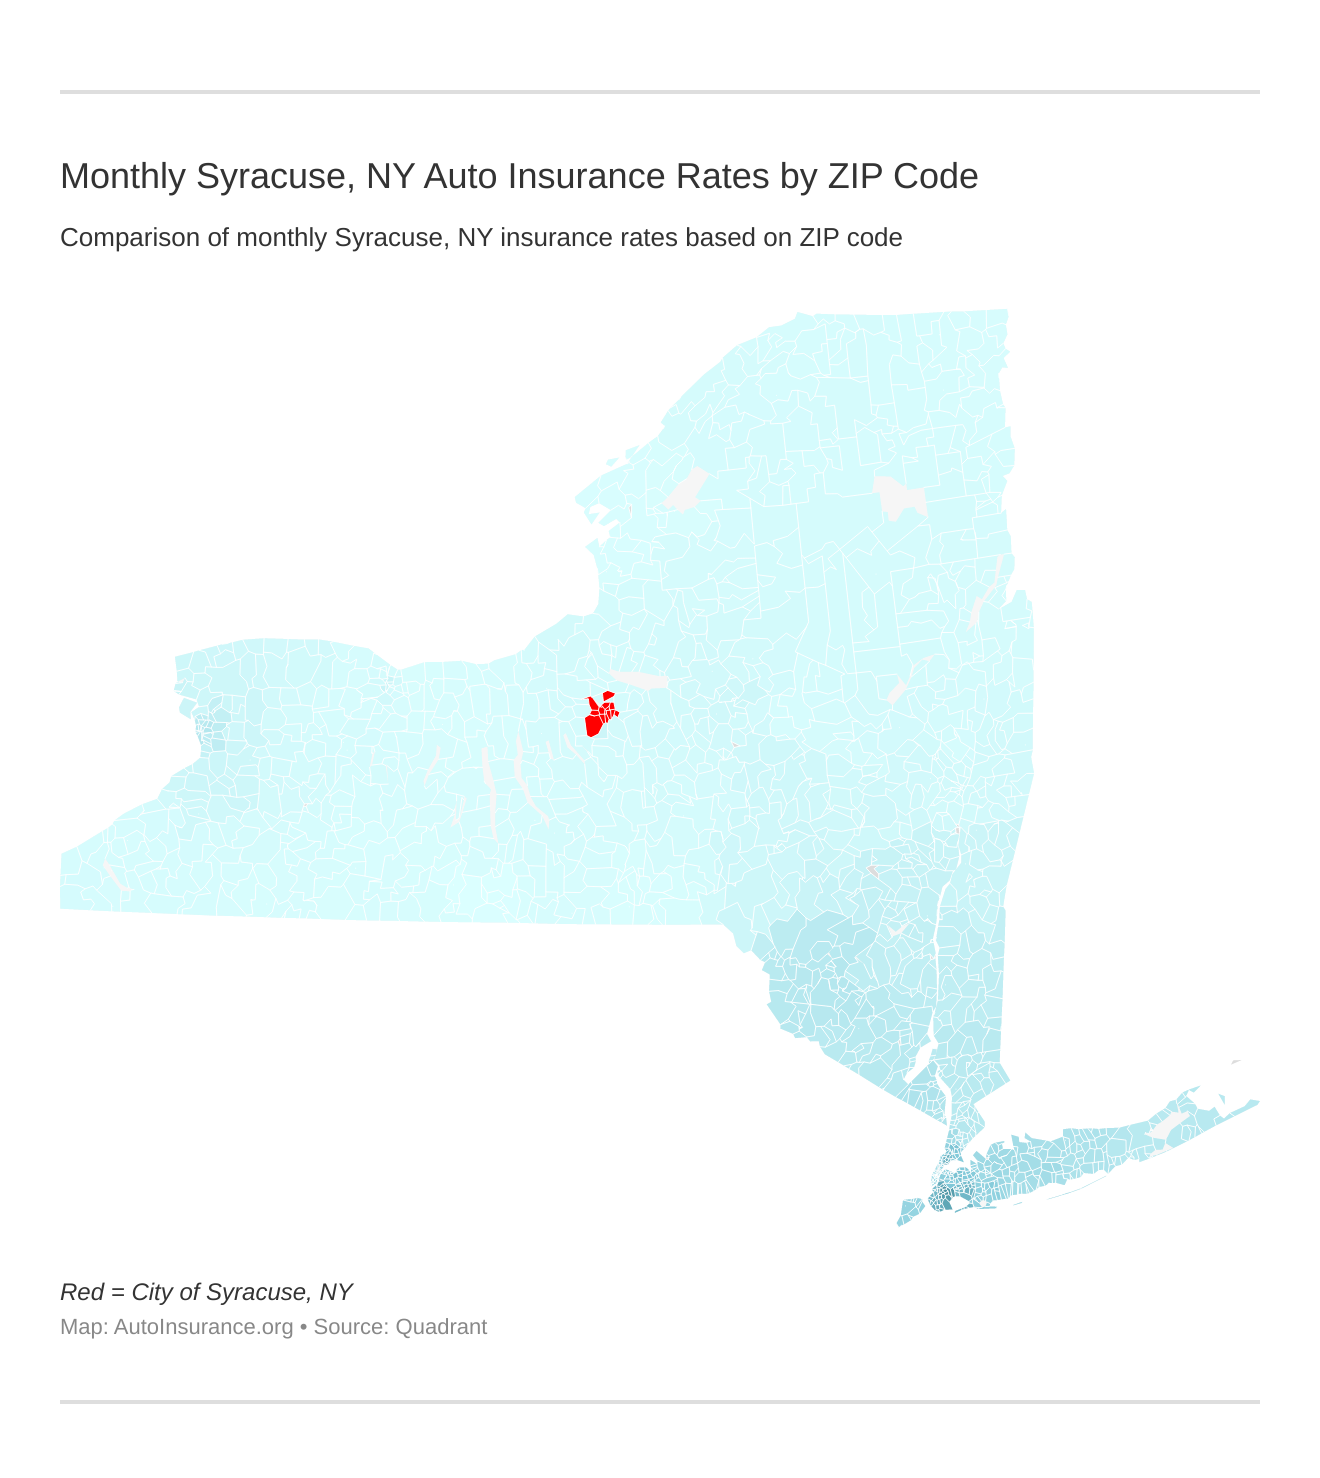 Monthly Syracuse, NY Auto Insurance Rates by ZIP Code